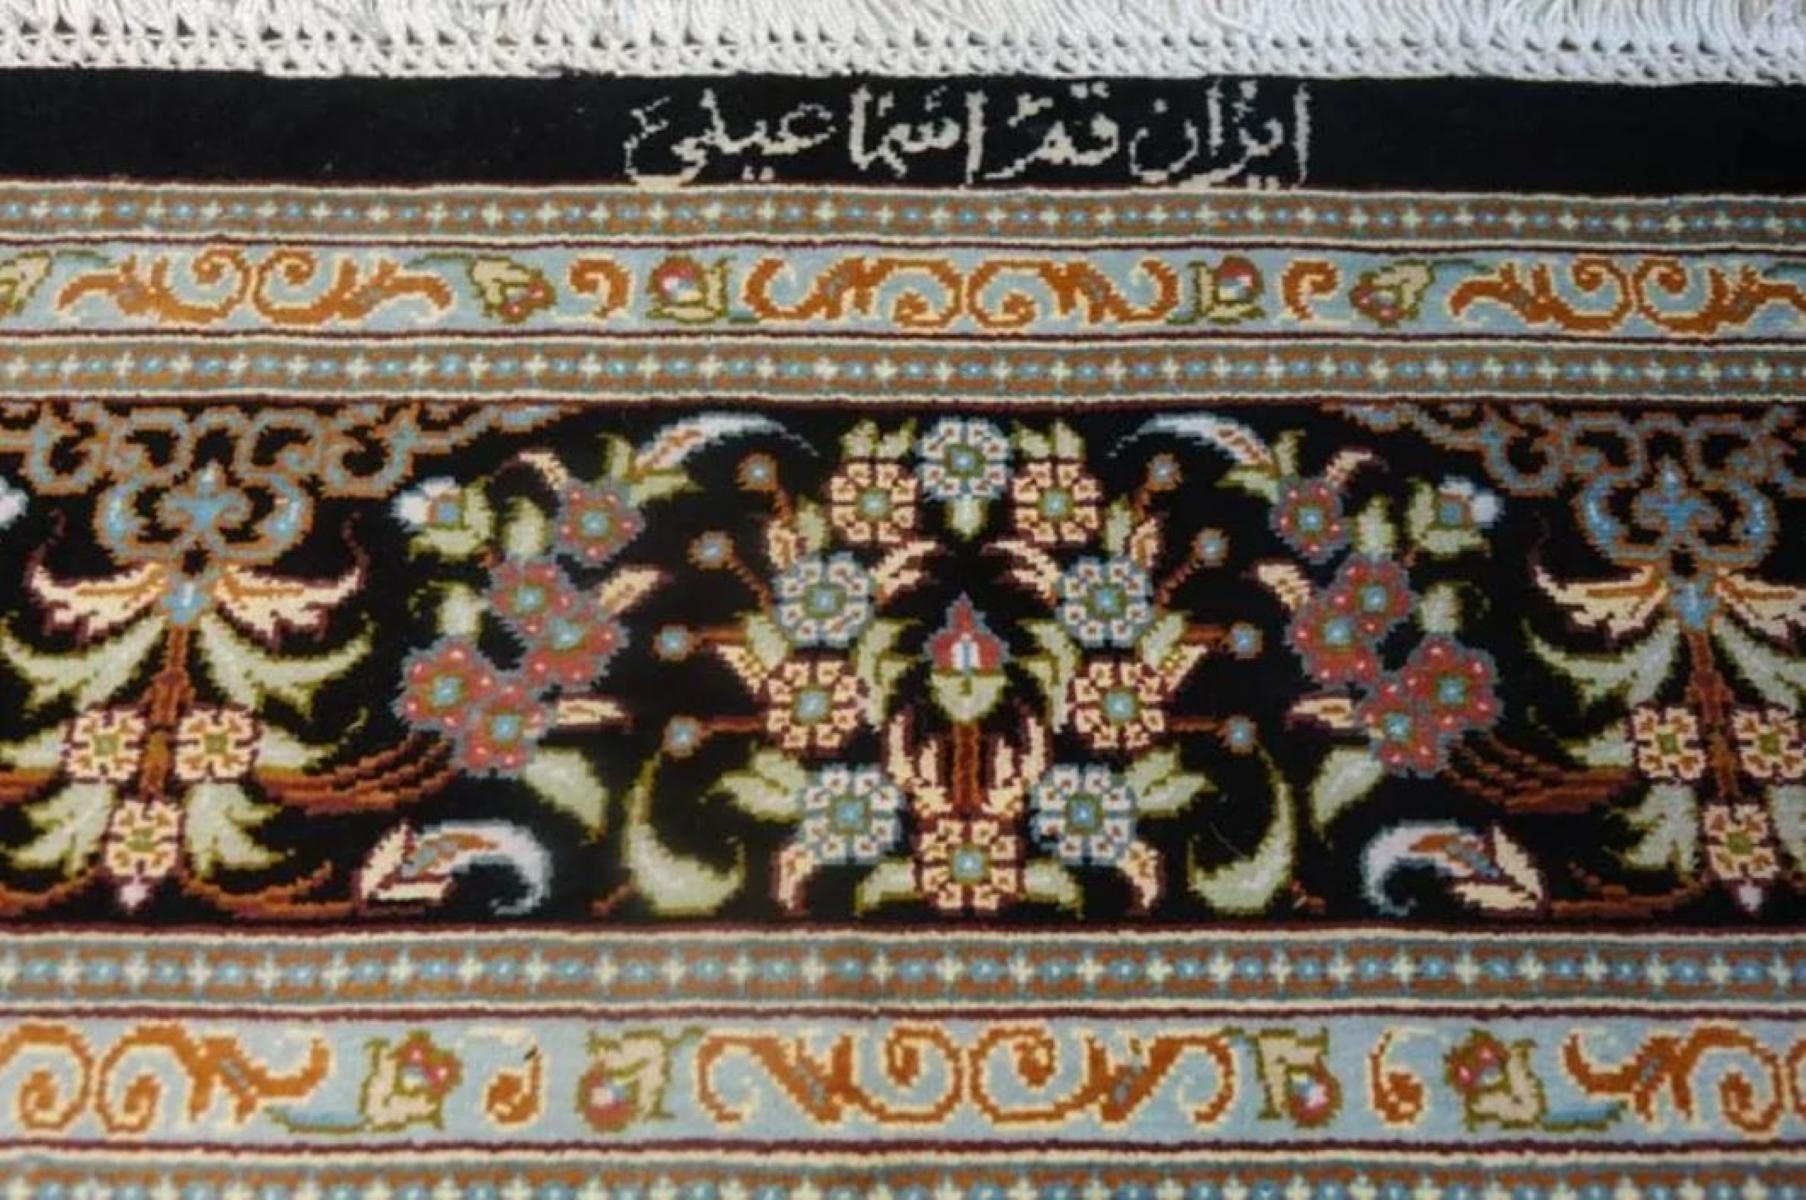 Very fine Persian Silk Qum - 5' x 3.5 In Excellent Condition For Sale In Newmanstown, PA